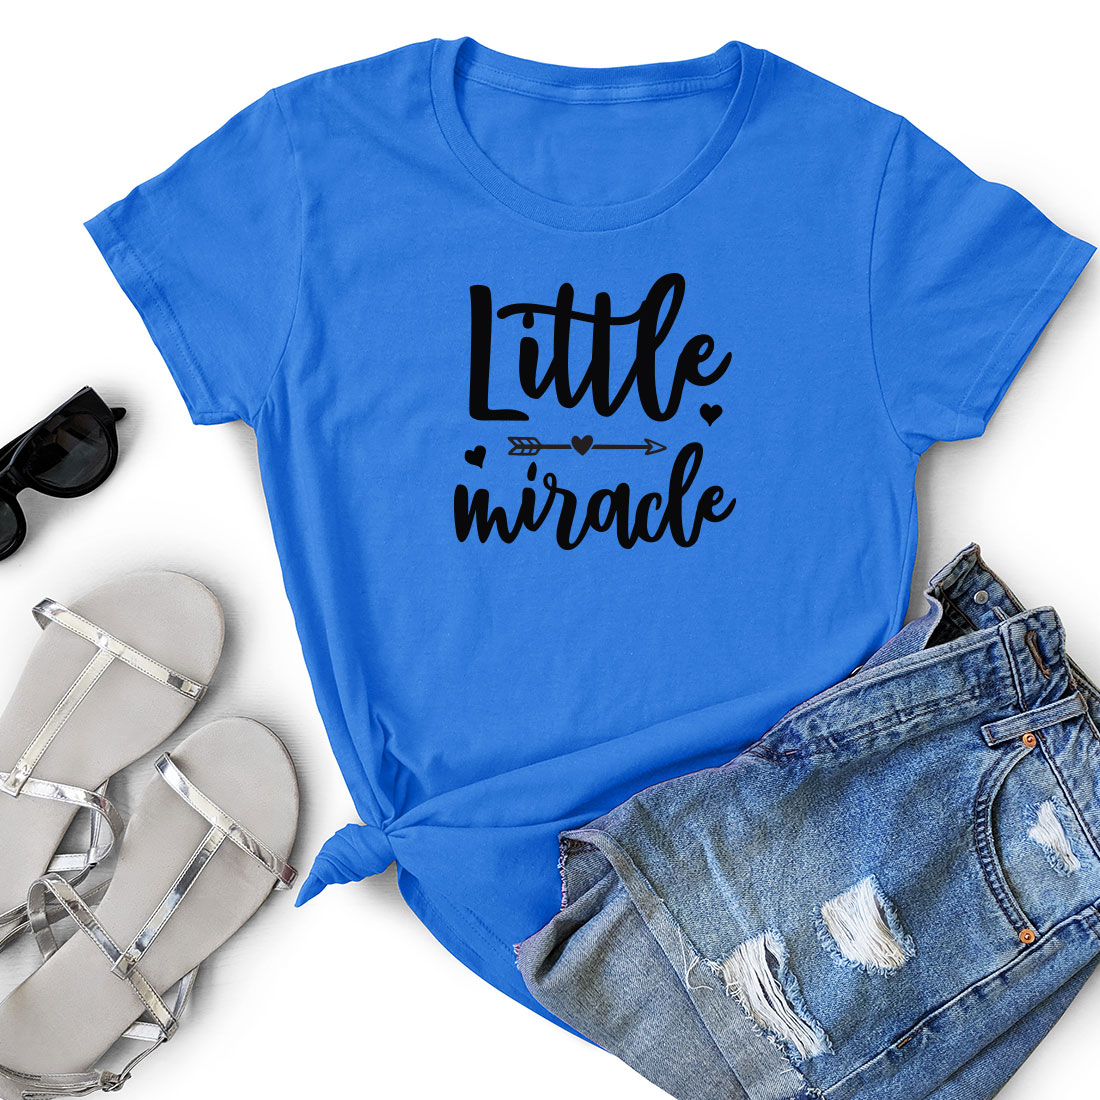 T - shirt that says little.